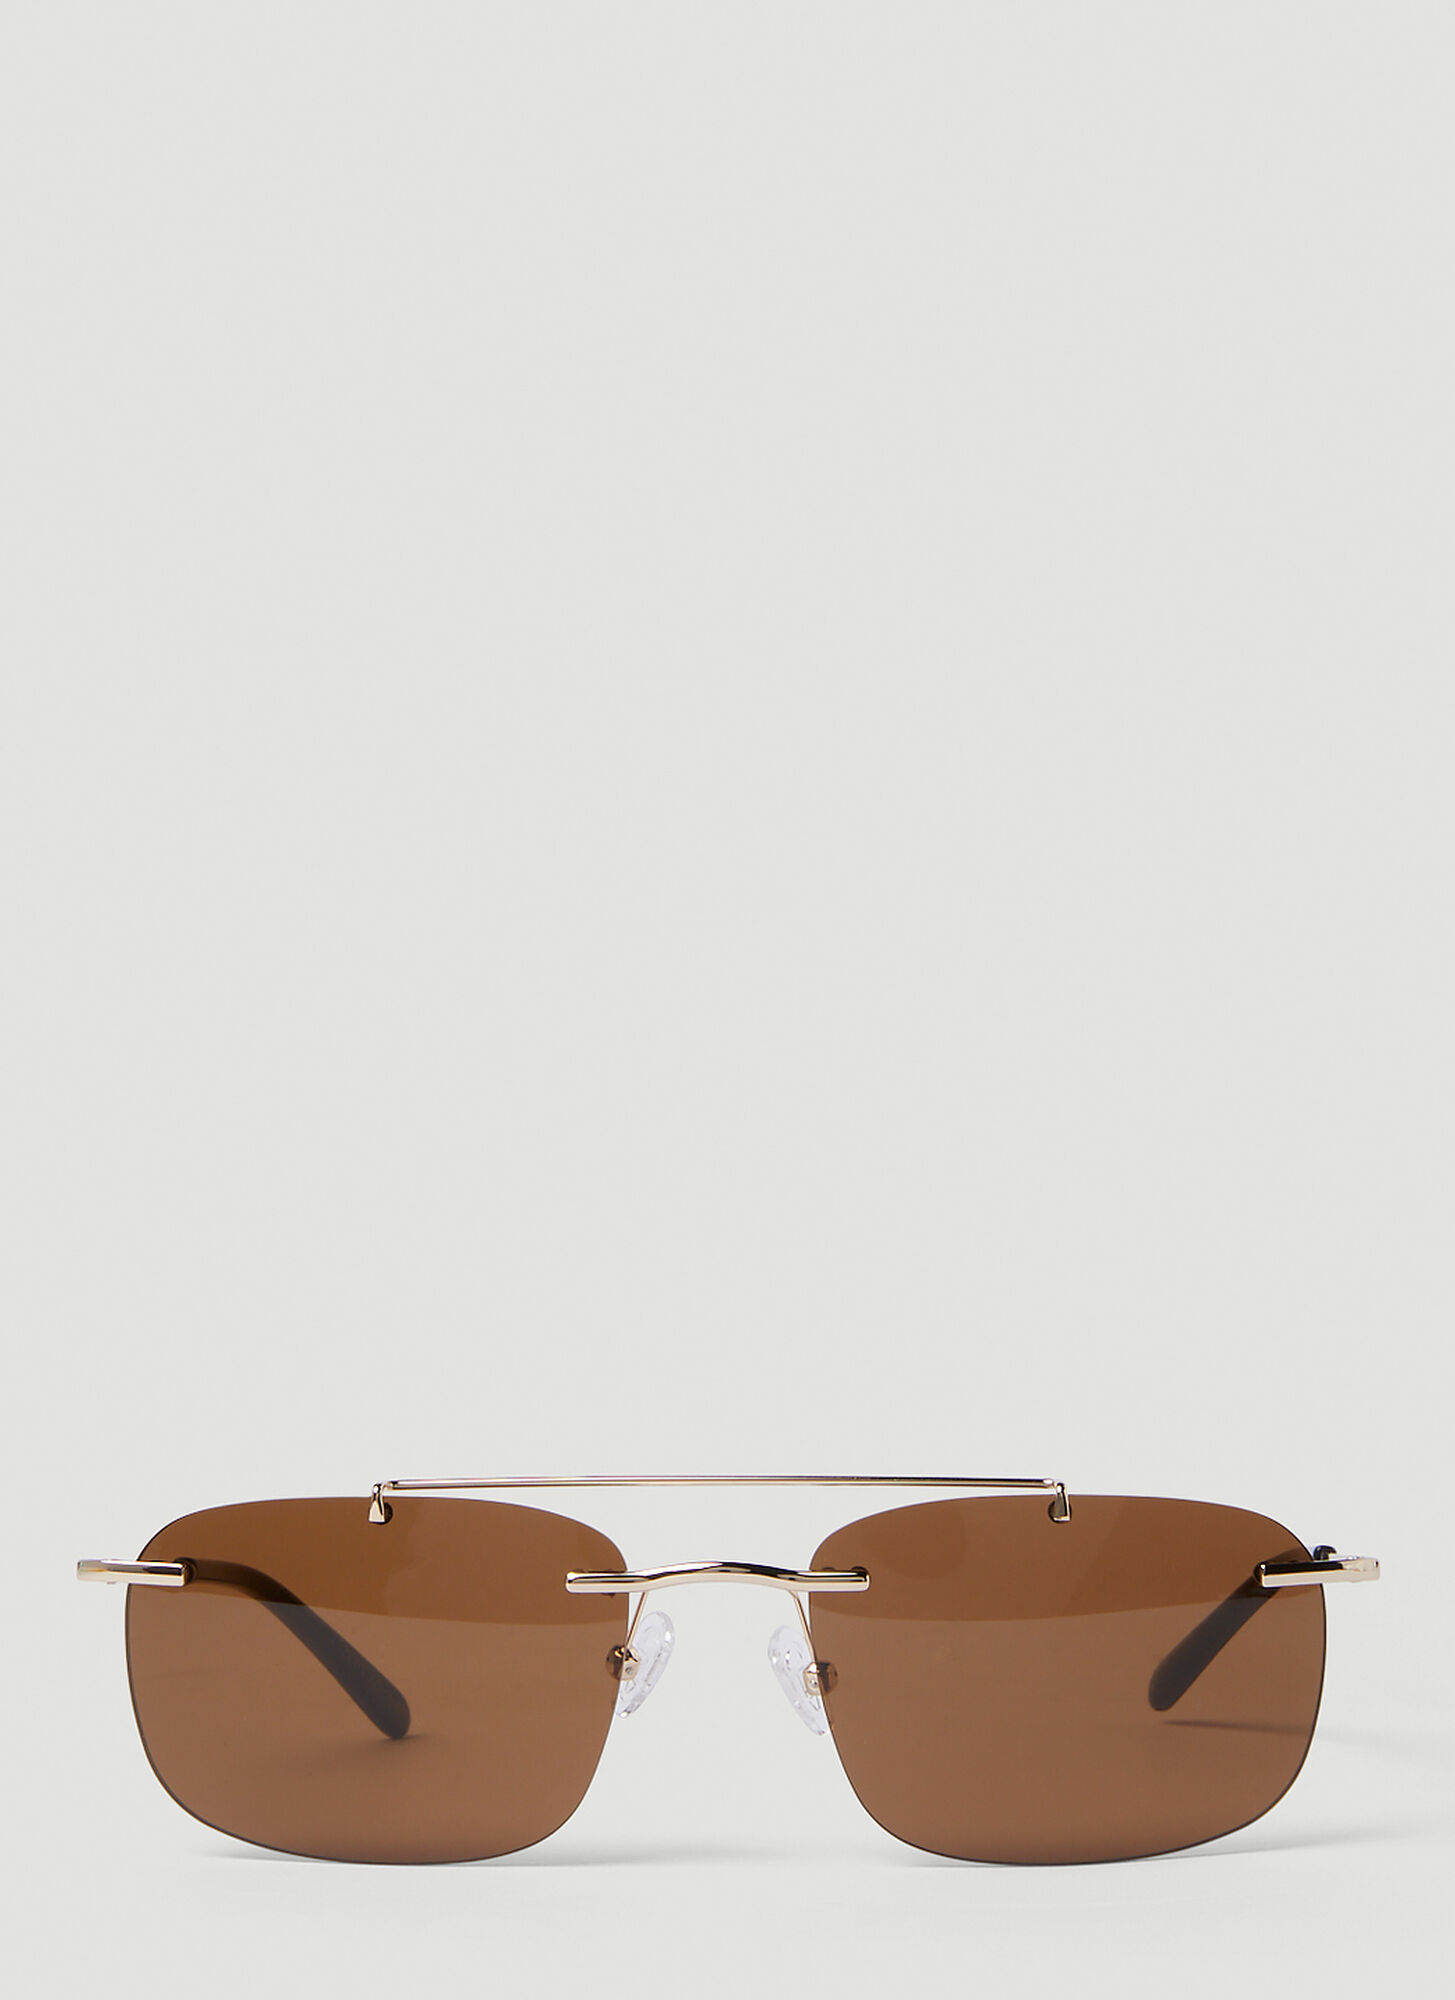 Eytys Avery Sunglasses In Brown